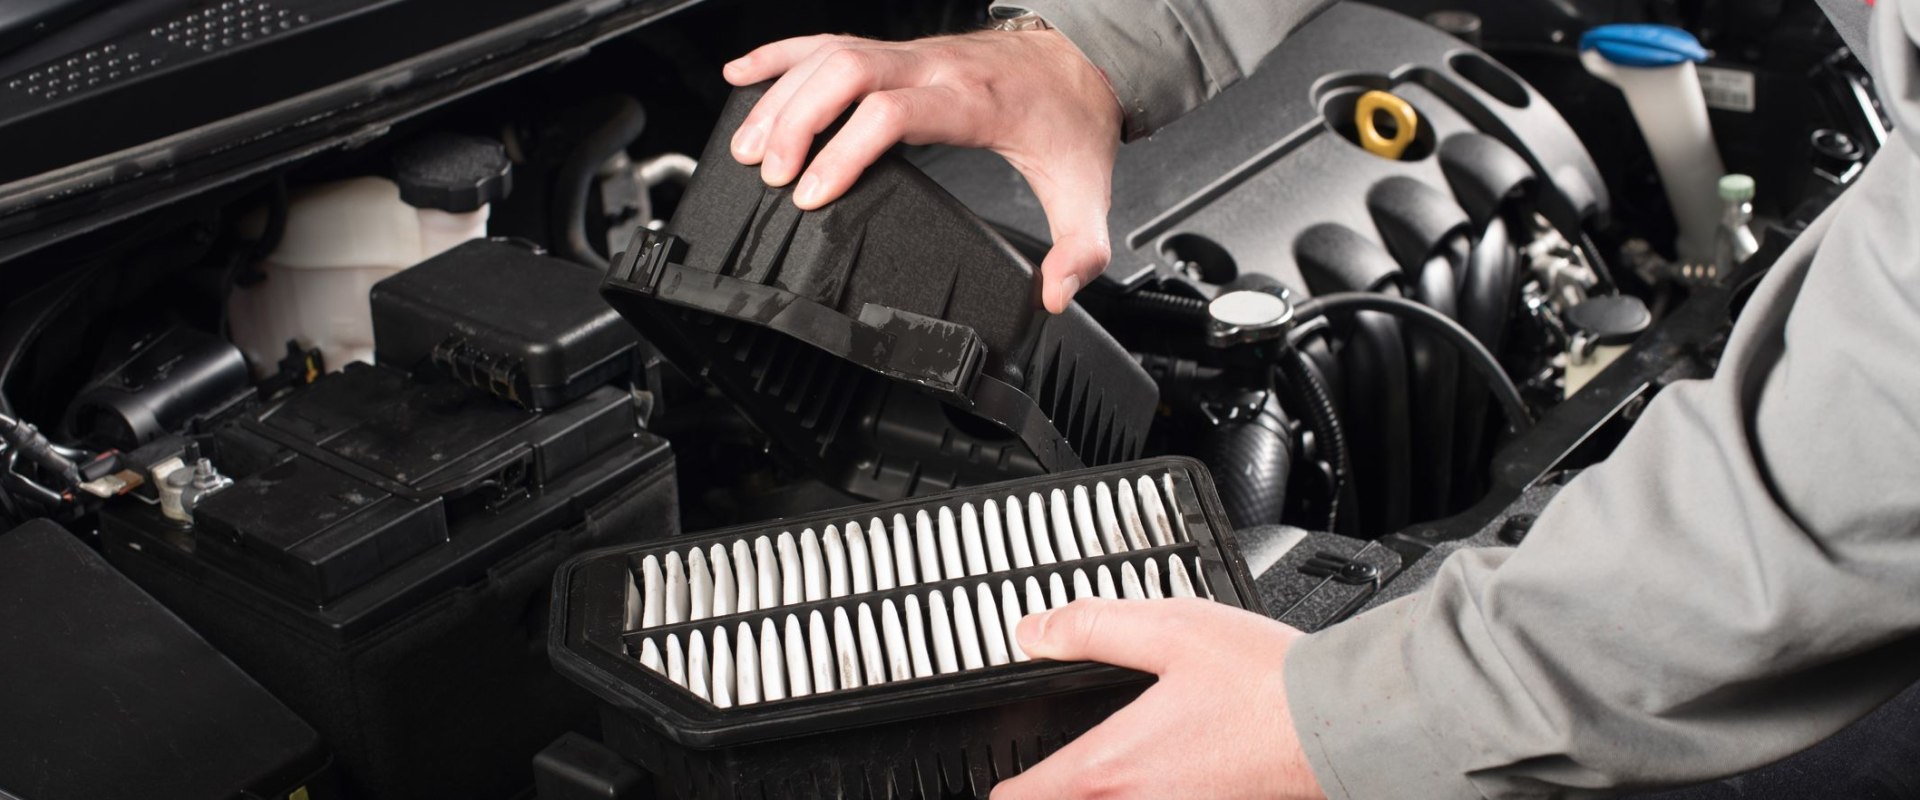 Does the Size of an Air Filter on a Car Really Impact Performance?